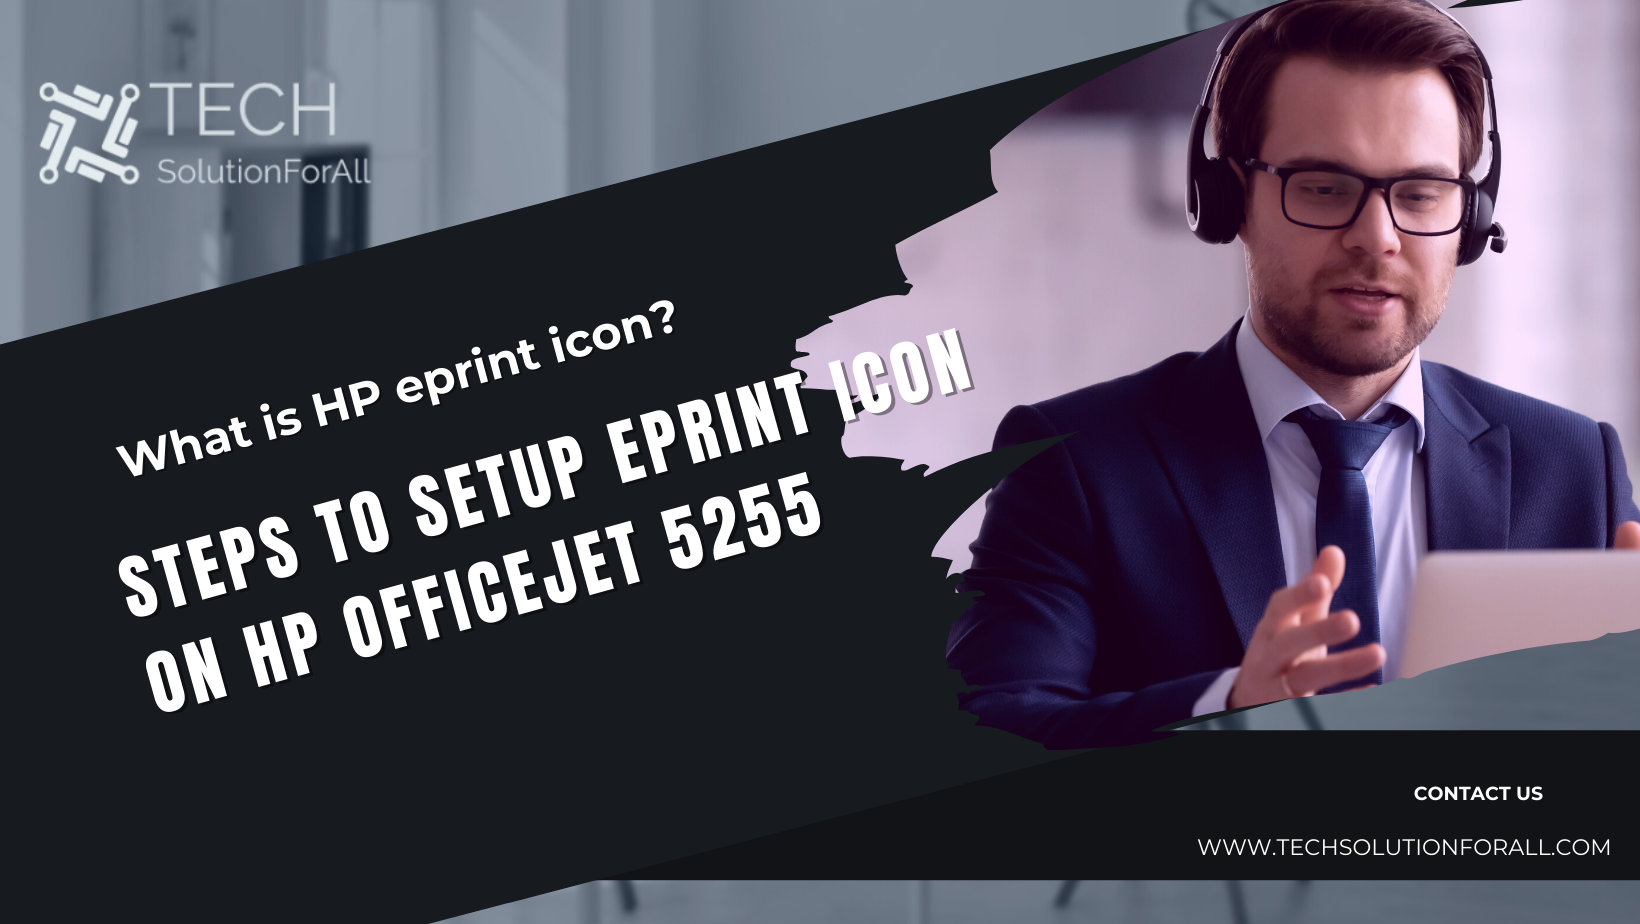 steps to set up eprint icon on hp officejet printer 